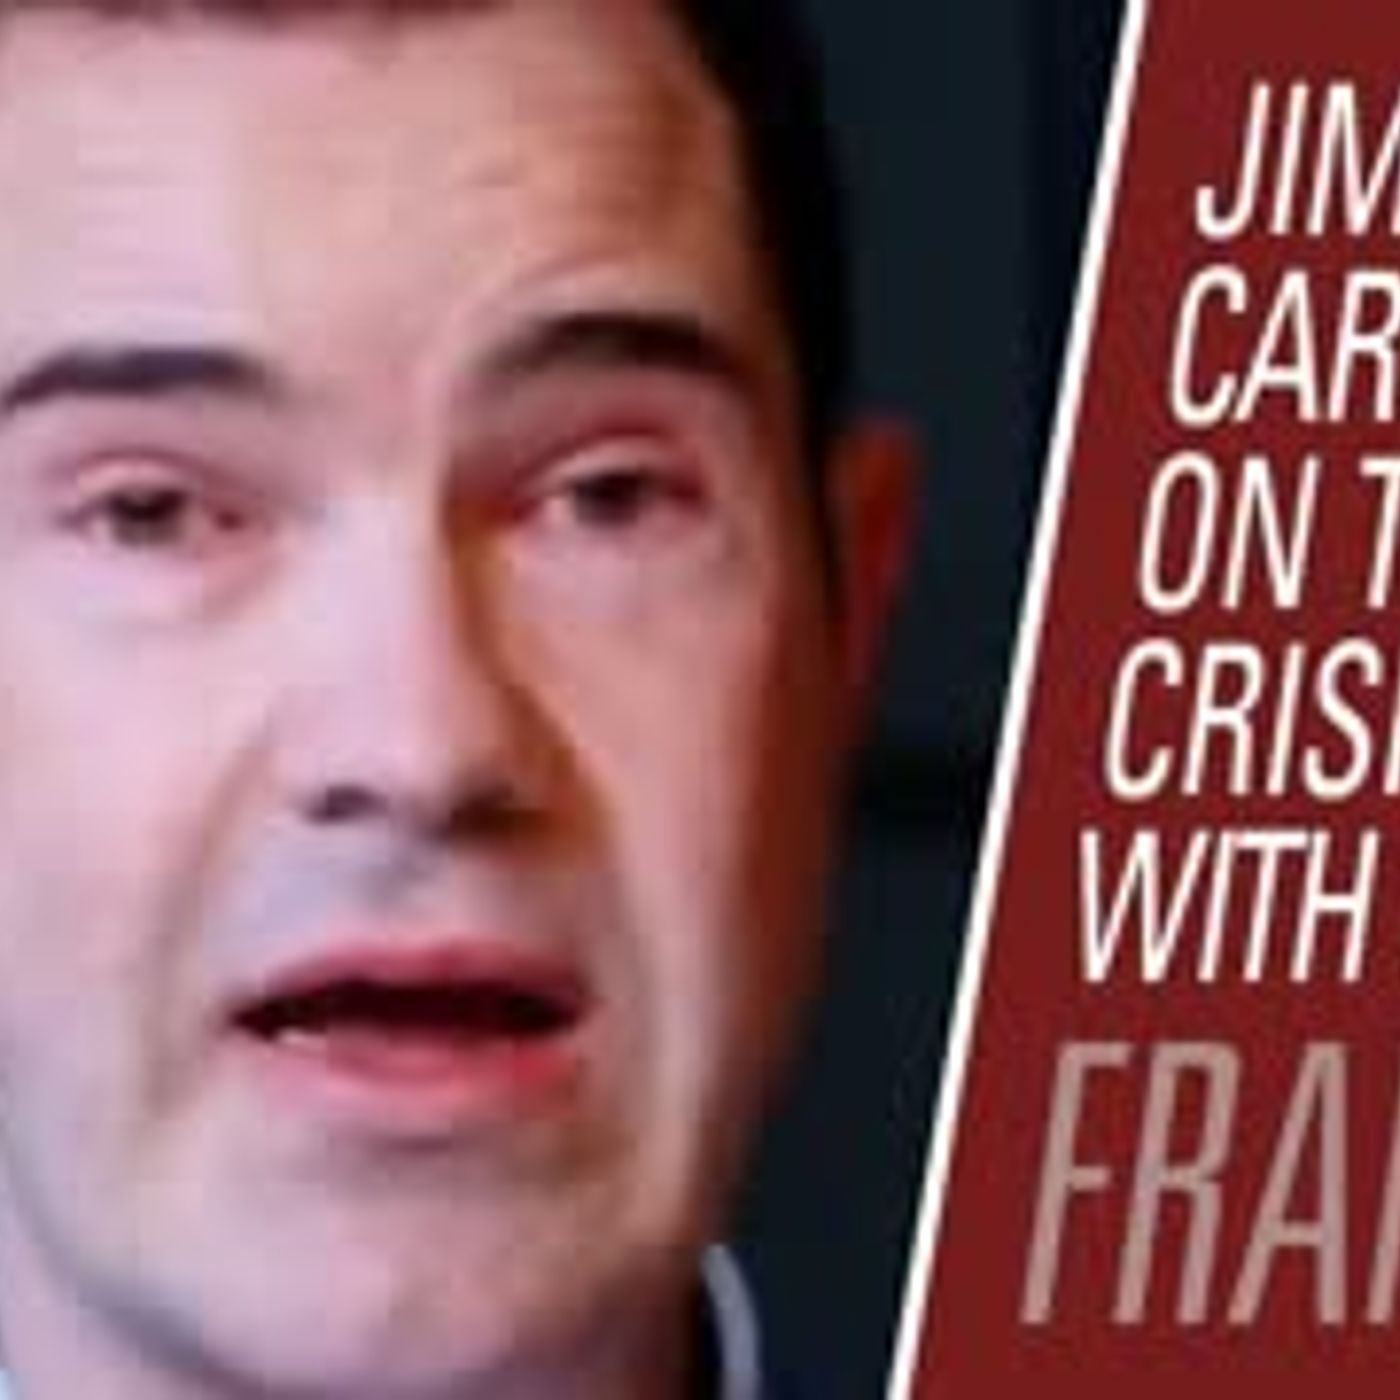 Jimmy Carr on the Crisis With Men | Maintaining Frame 91